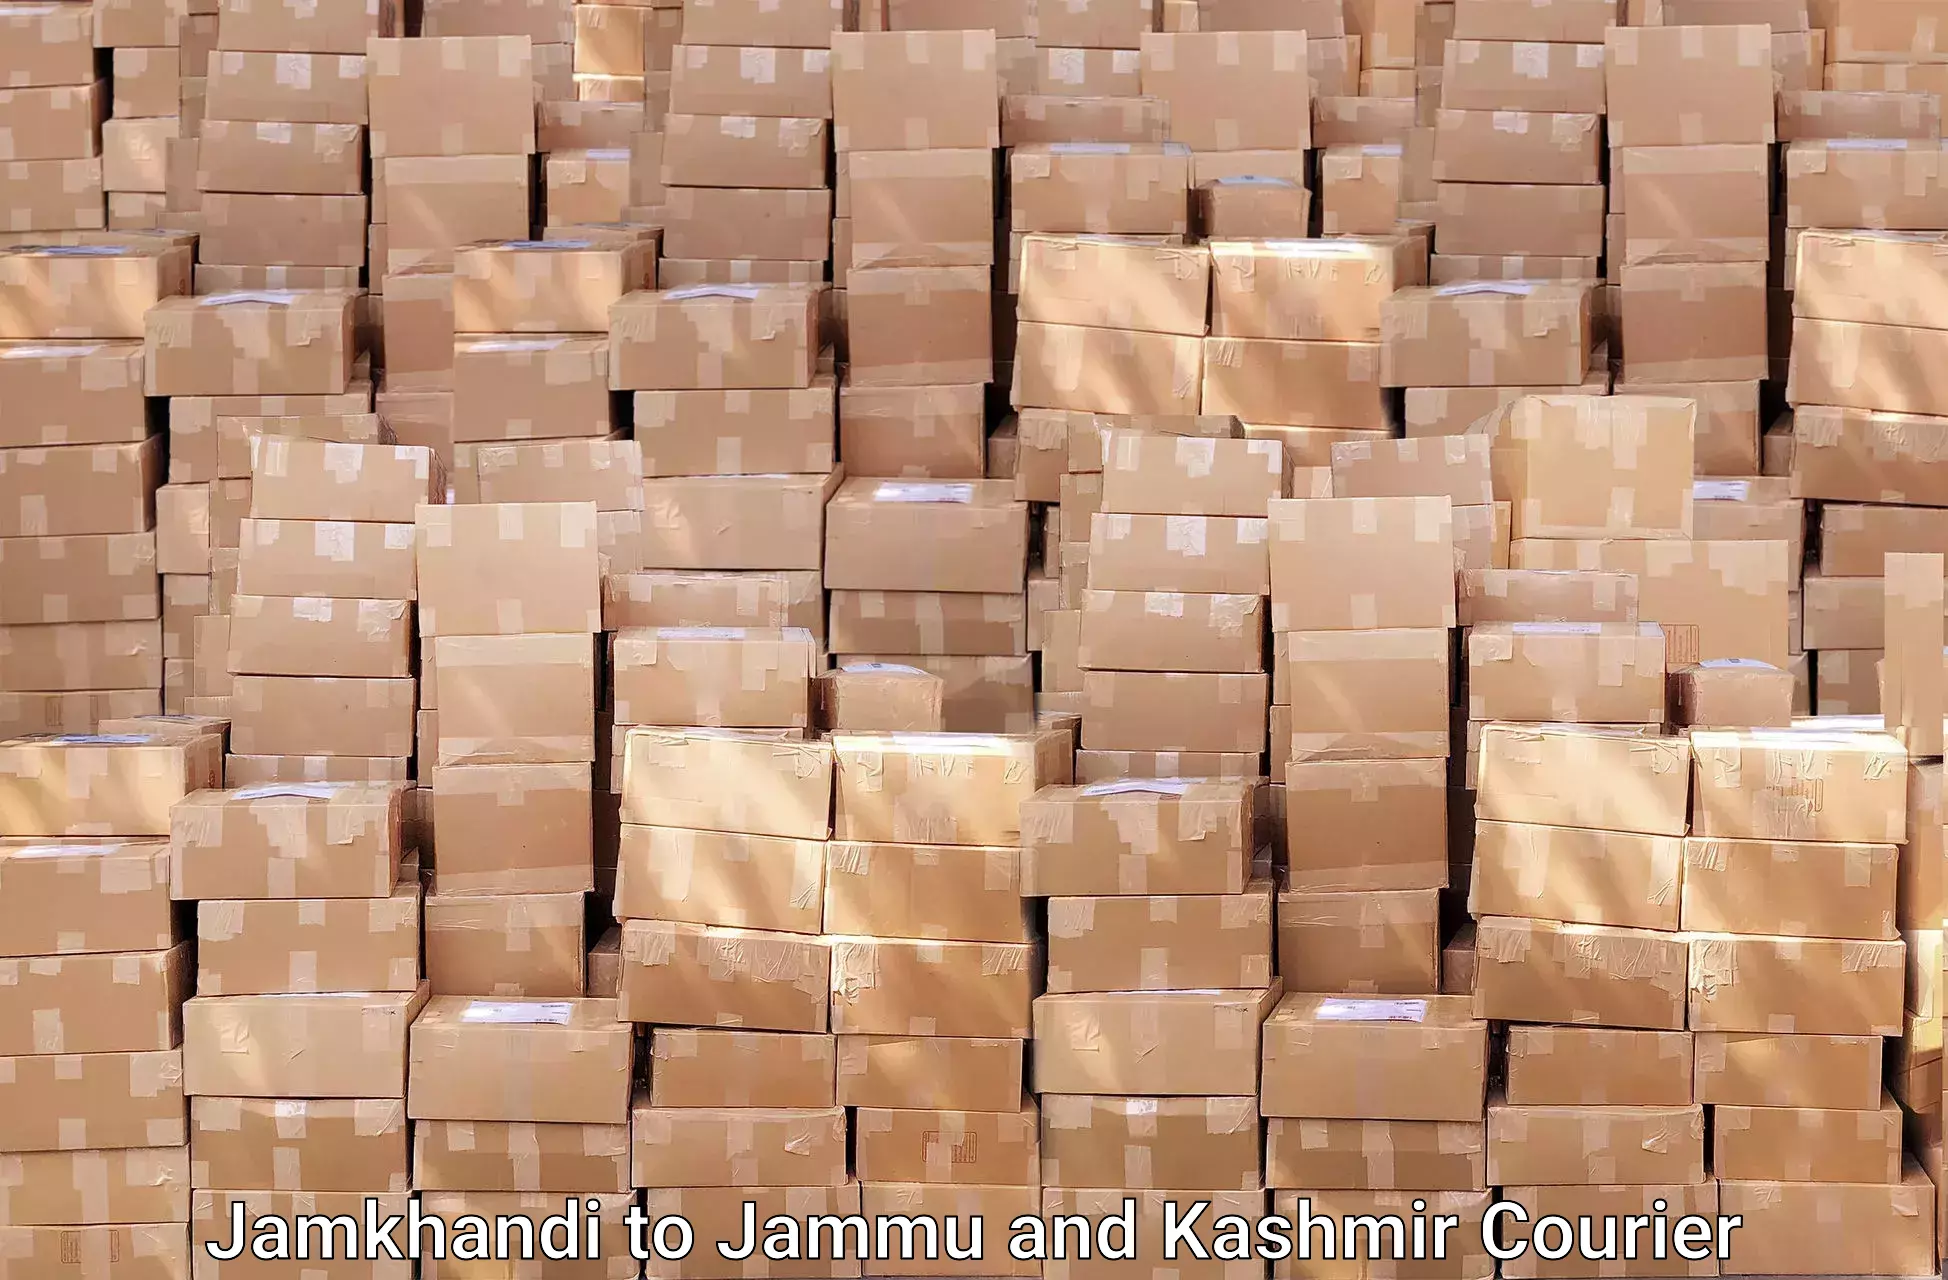 Packing and moving services Jamkhandi to Jammu and Kashmir